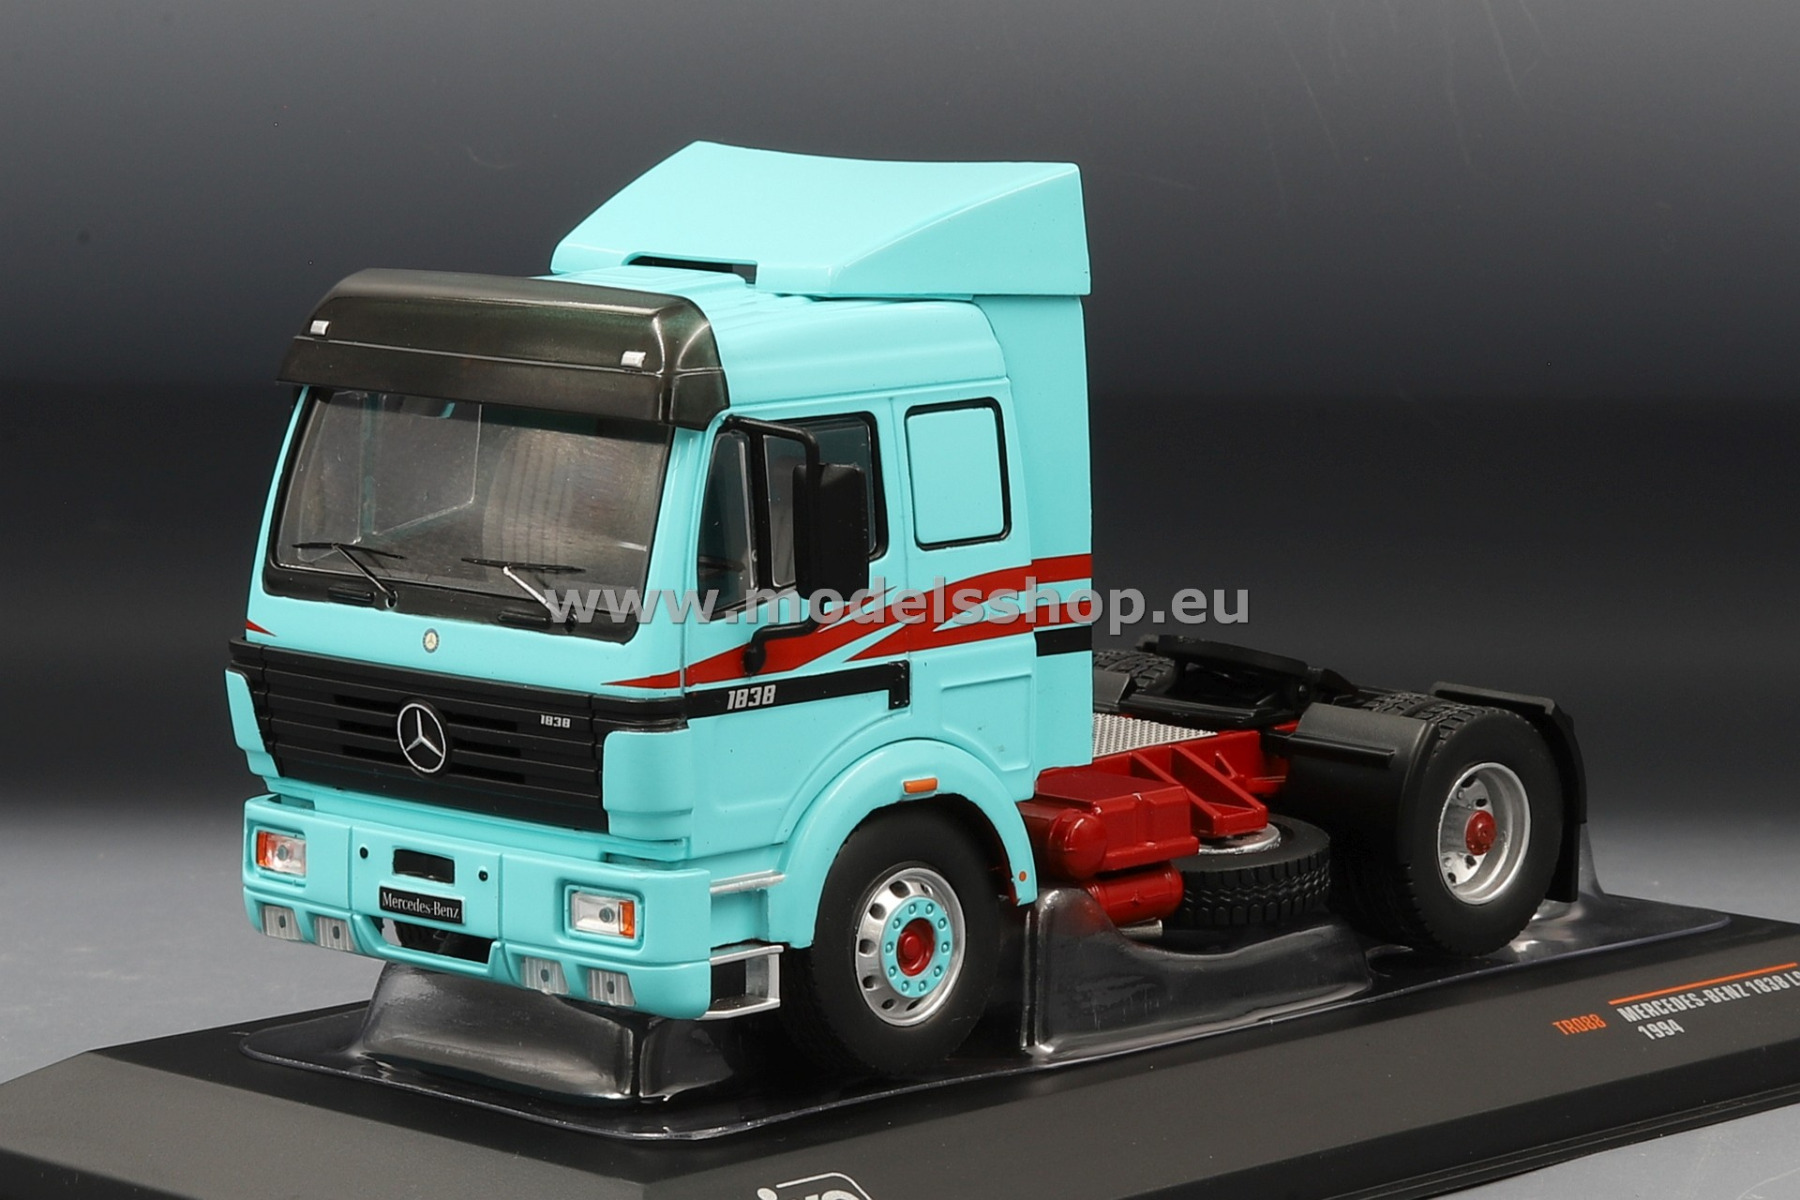 Mercedes-Benz SK II 1838, tractor truck, 1994 /turqoise - decorated/